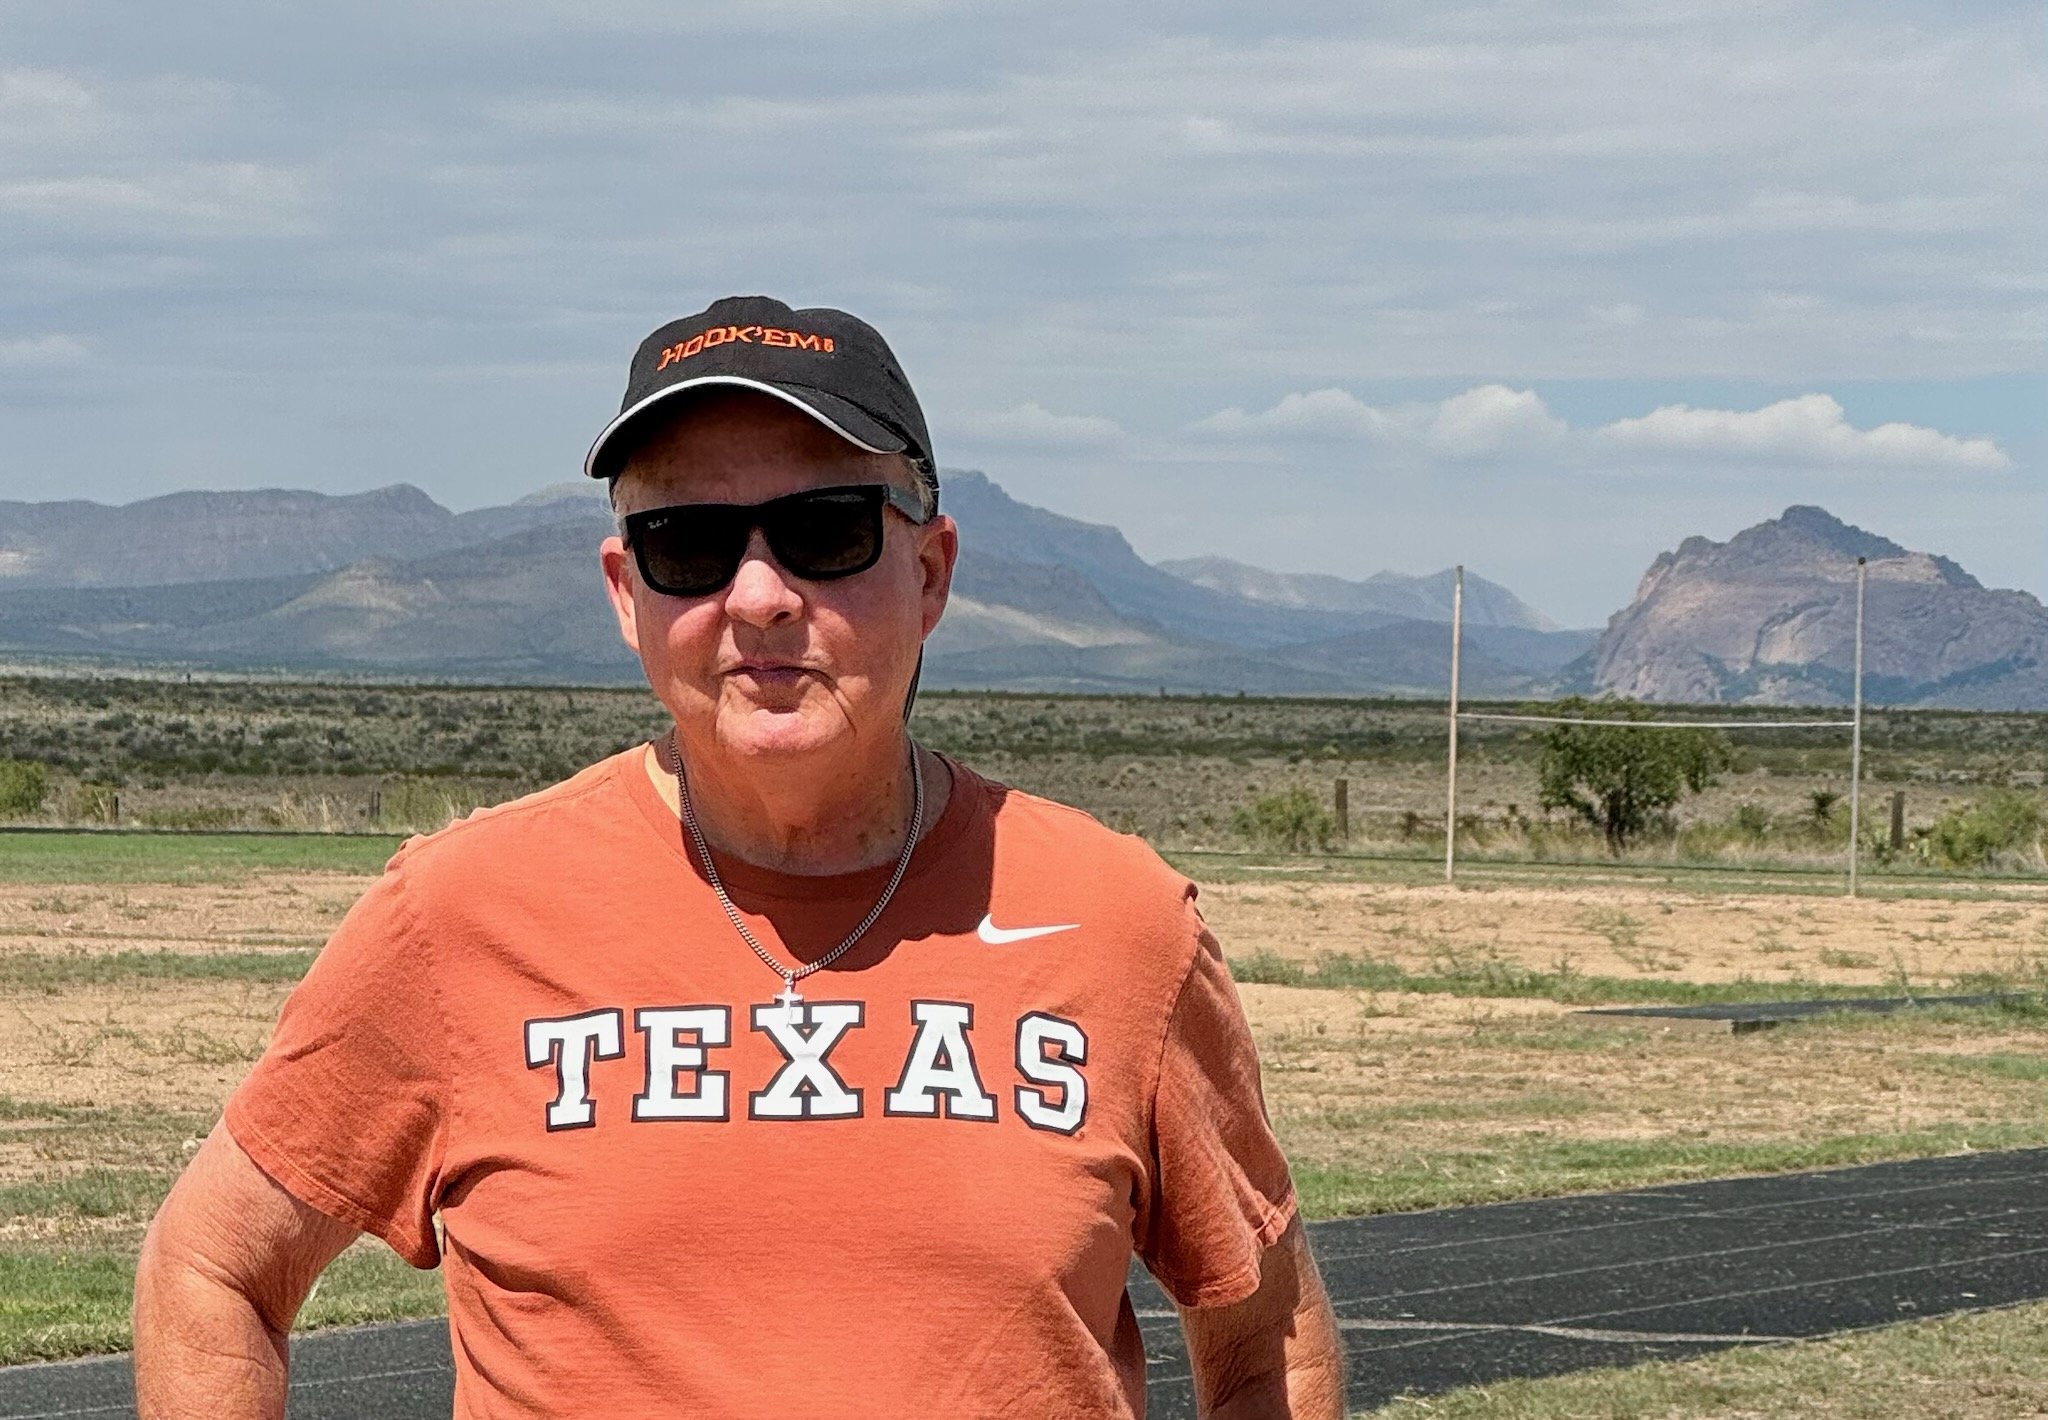 (TLSN's Larry Carlson teaches sports media at Texas State in San Marcos. He is a member of the Football Writers Association of America. Write to him at lc13@txstate.edu)